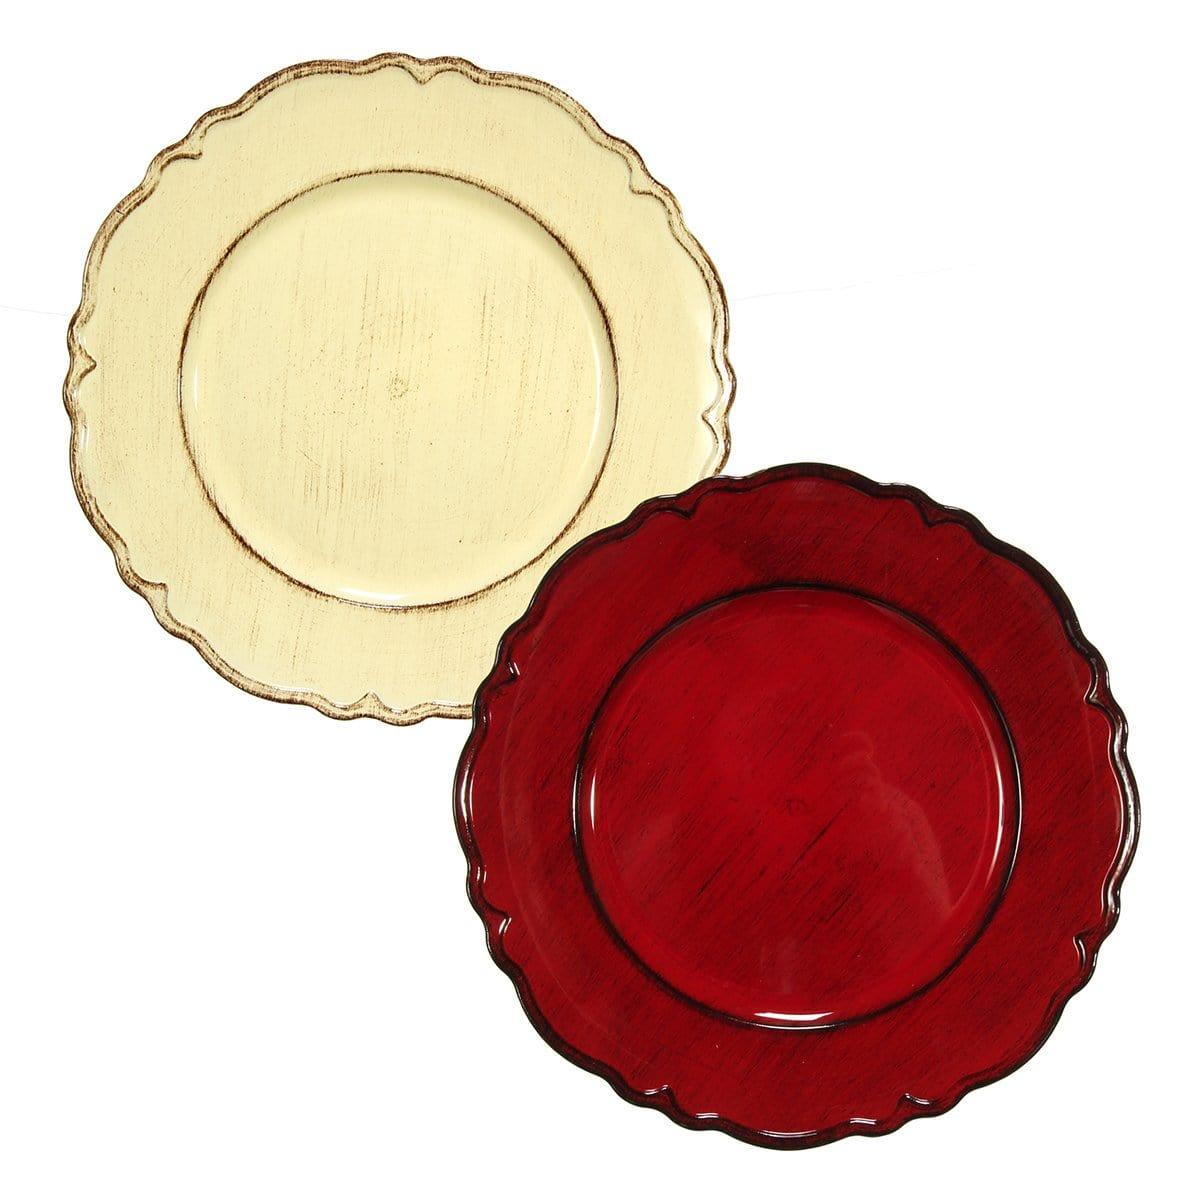 Buy Christmas Scalloped Edged Charger Plate Asst. 13 in. sold at Party Expert